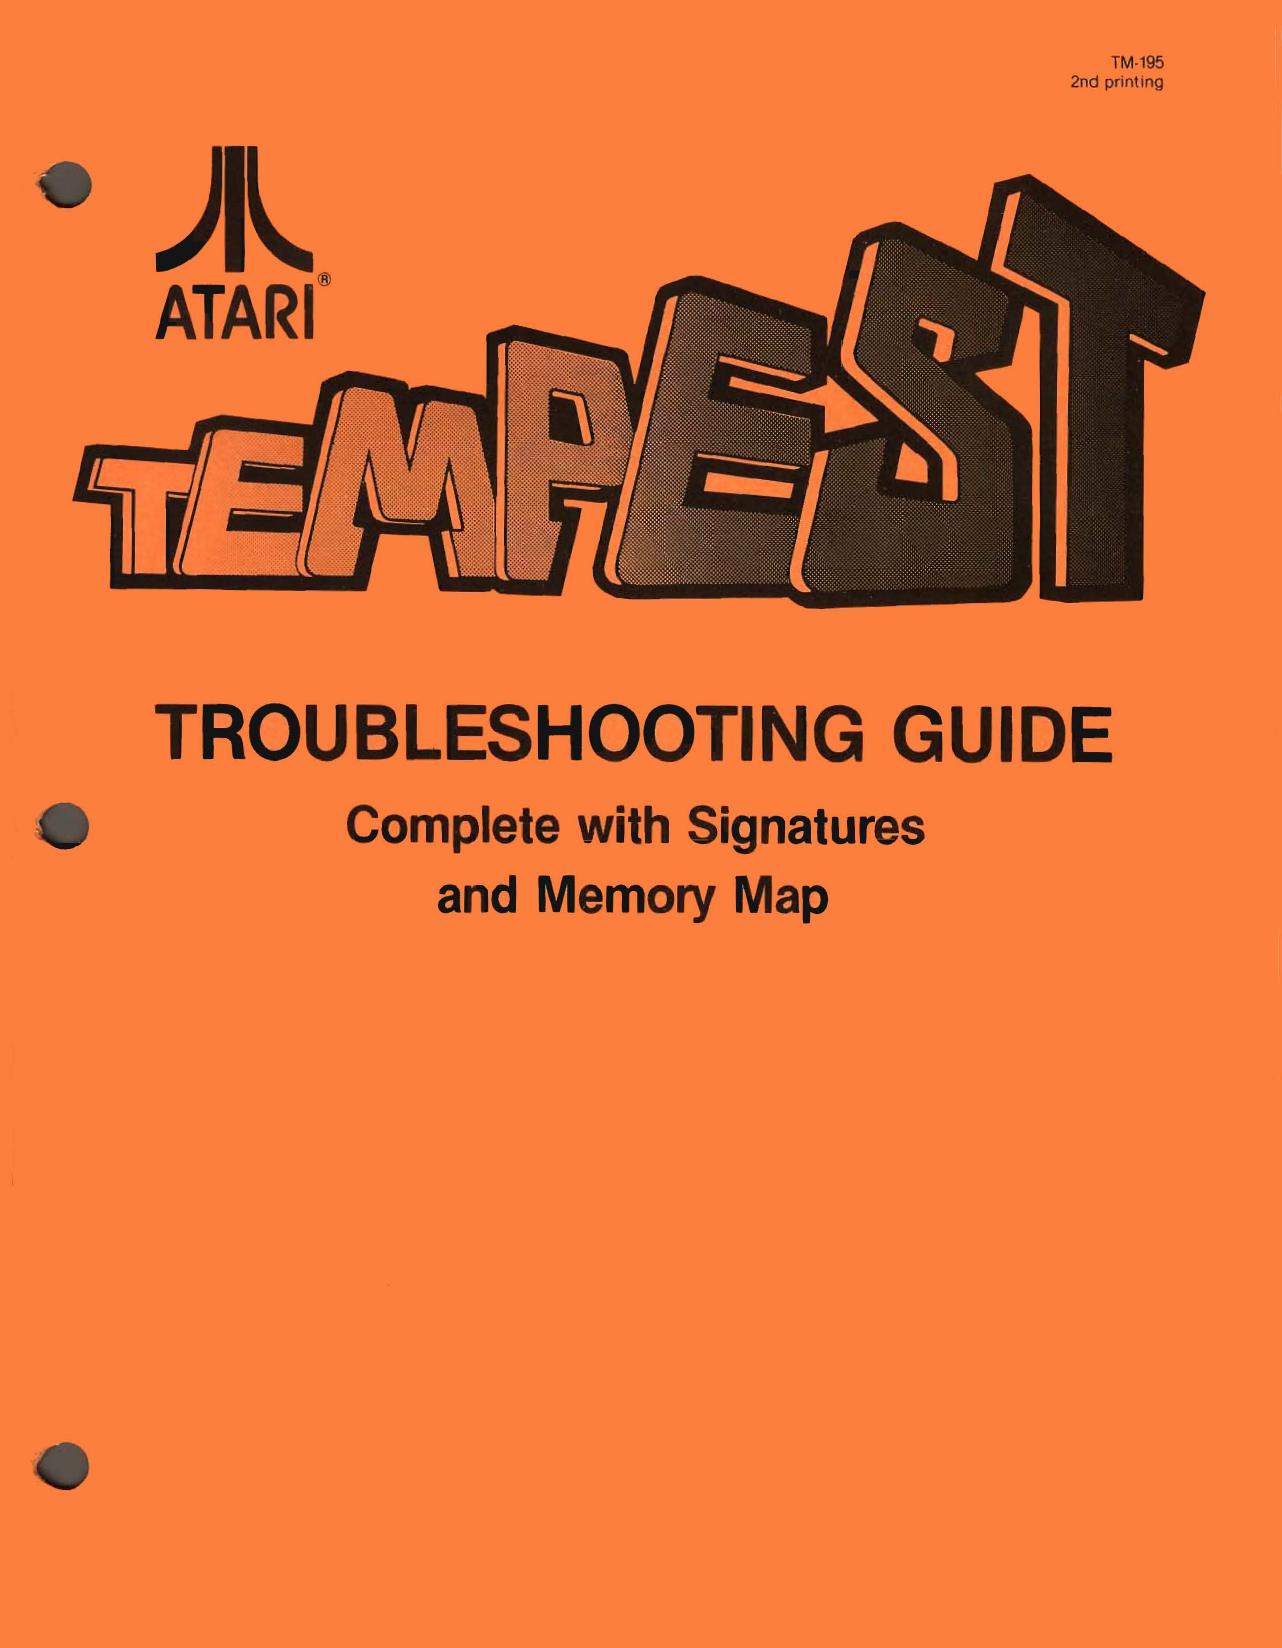 Tempest Troubleshooting Guide TM-195 2nd Printing